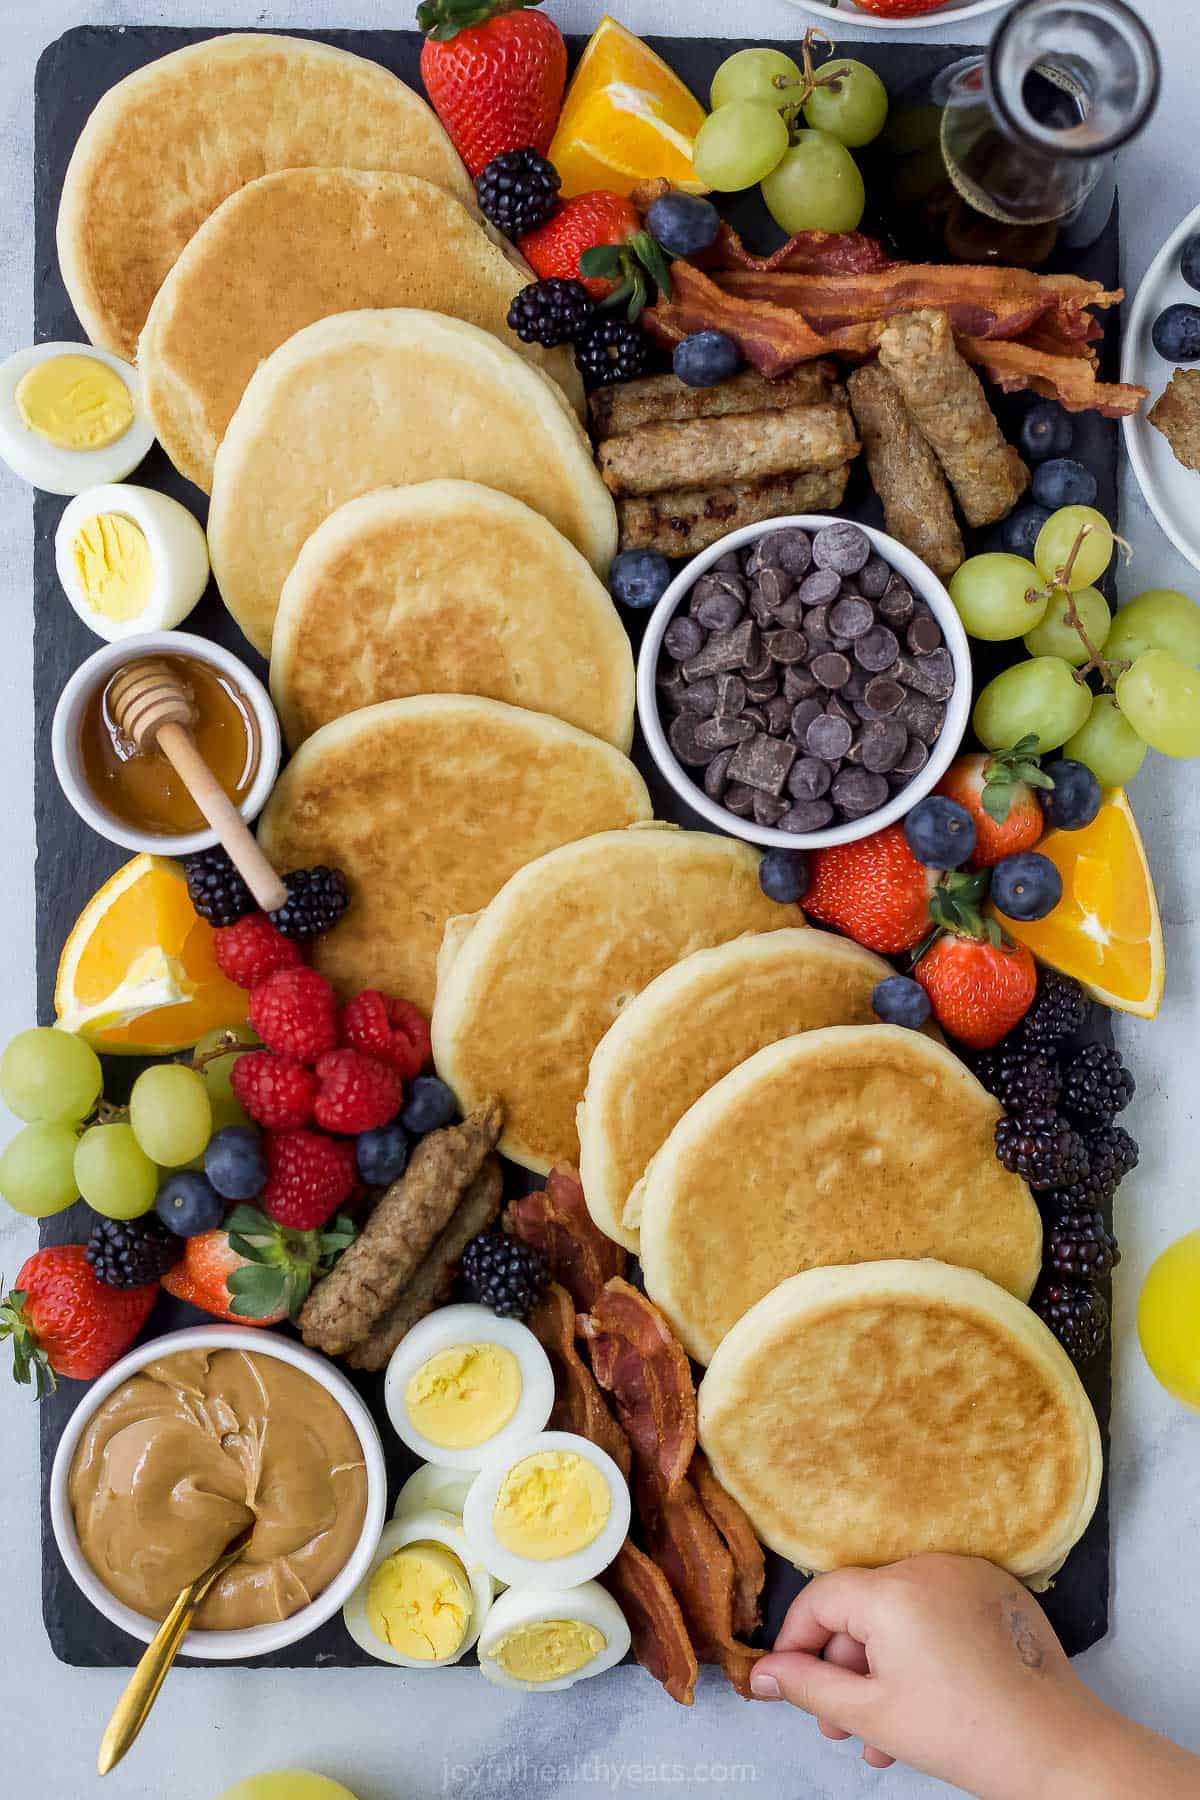 A charcuterie board full of pancakes, fruits, meats and condiments with a hand reaching for a piece of bacon